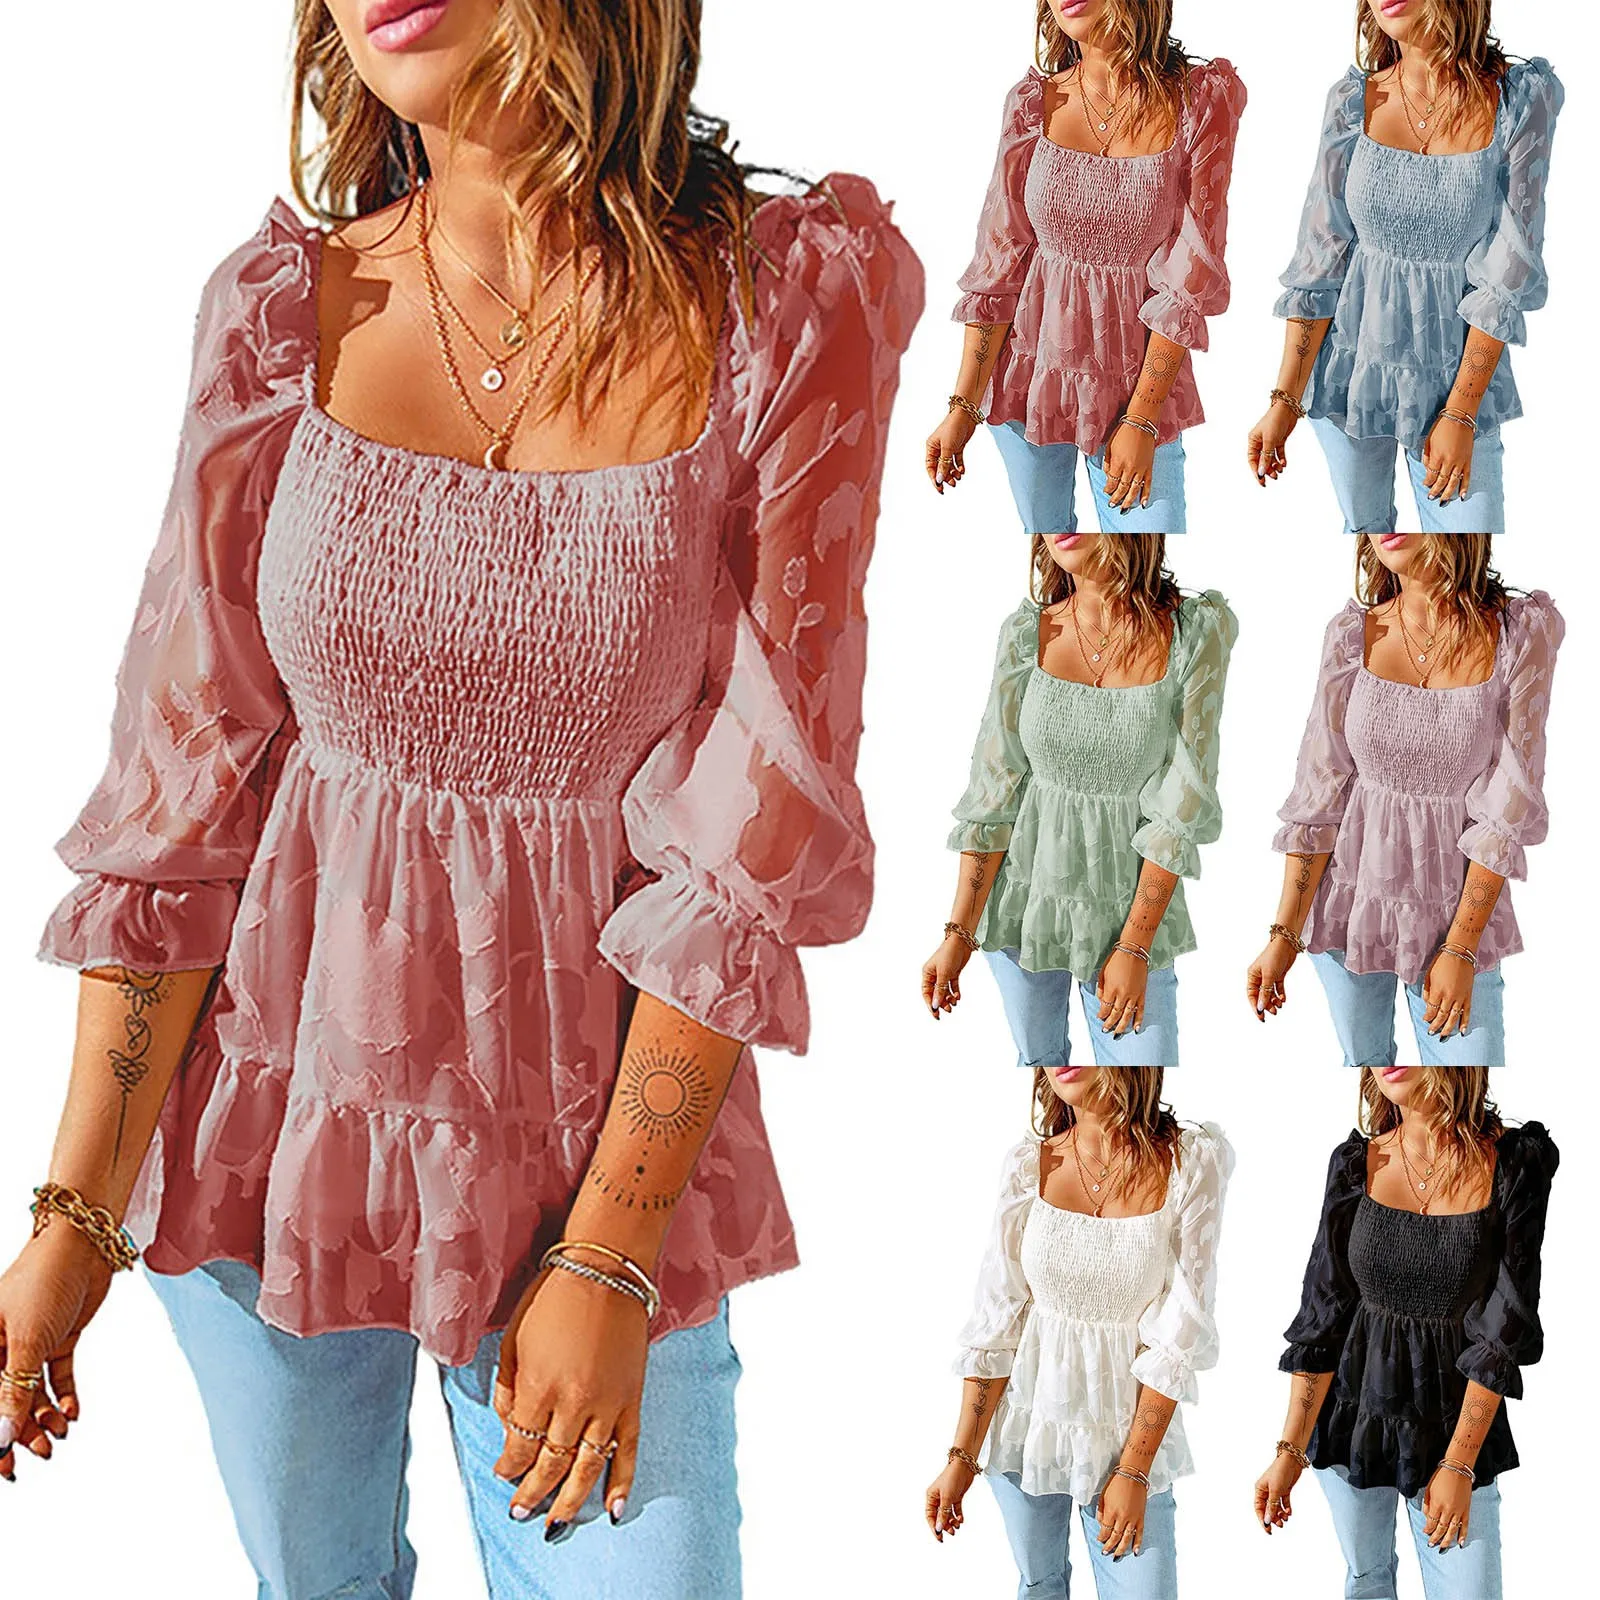 

Women Tops And Bloues Sexy Women Long Sleeve Square Neck Shirt Drawstring Off Shoulder Blouse Ruffle Puff Sleeve Tunic Crop Top